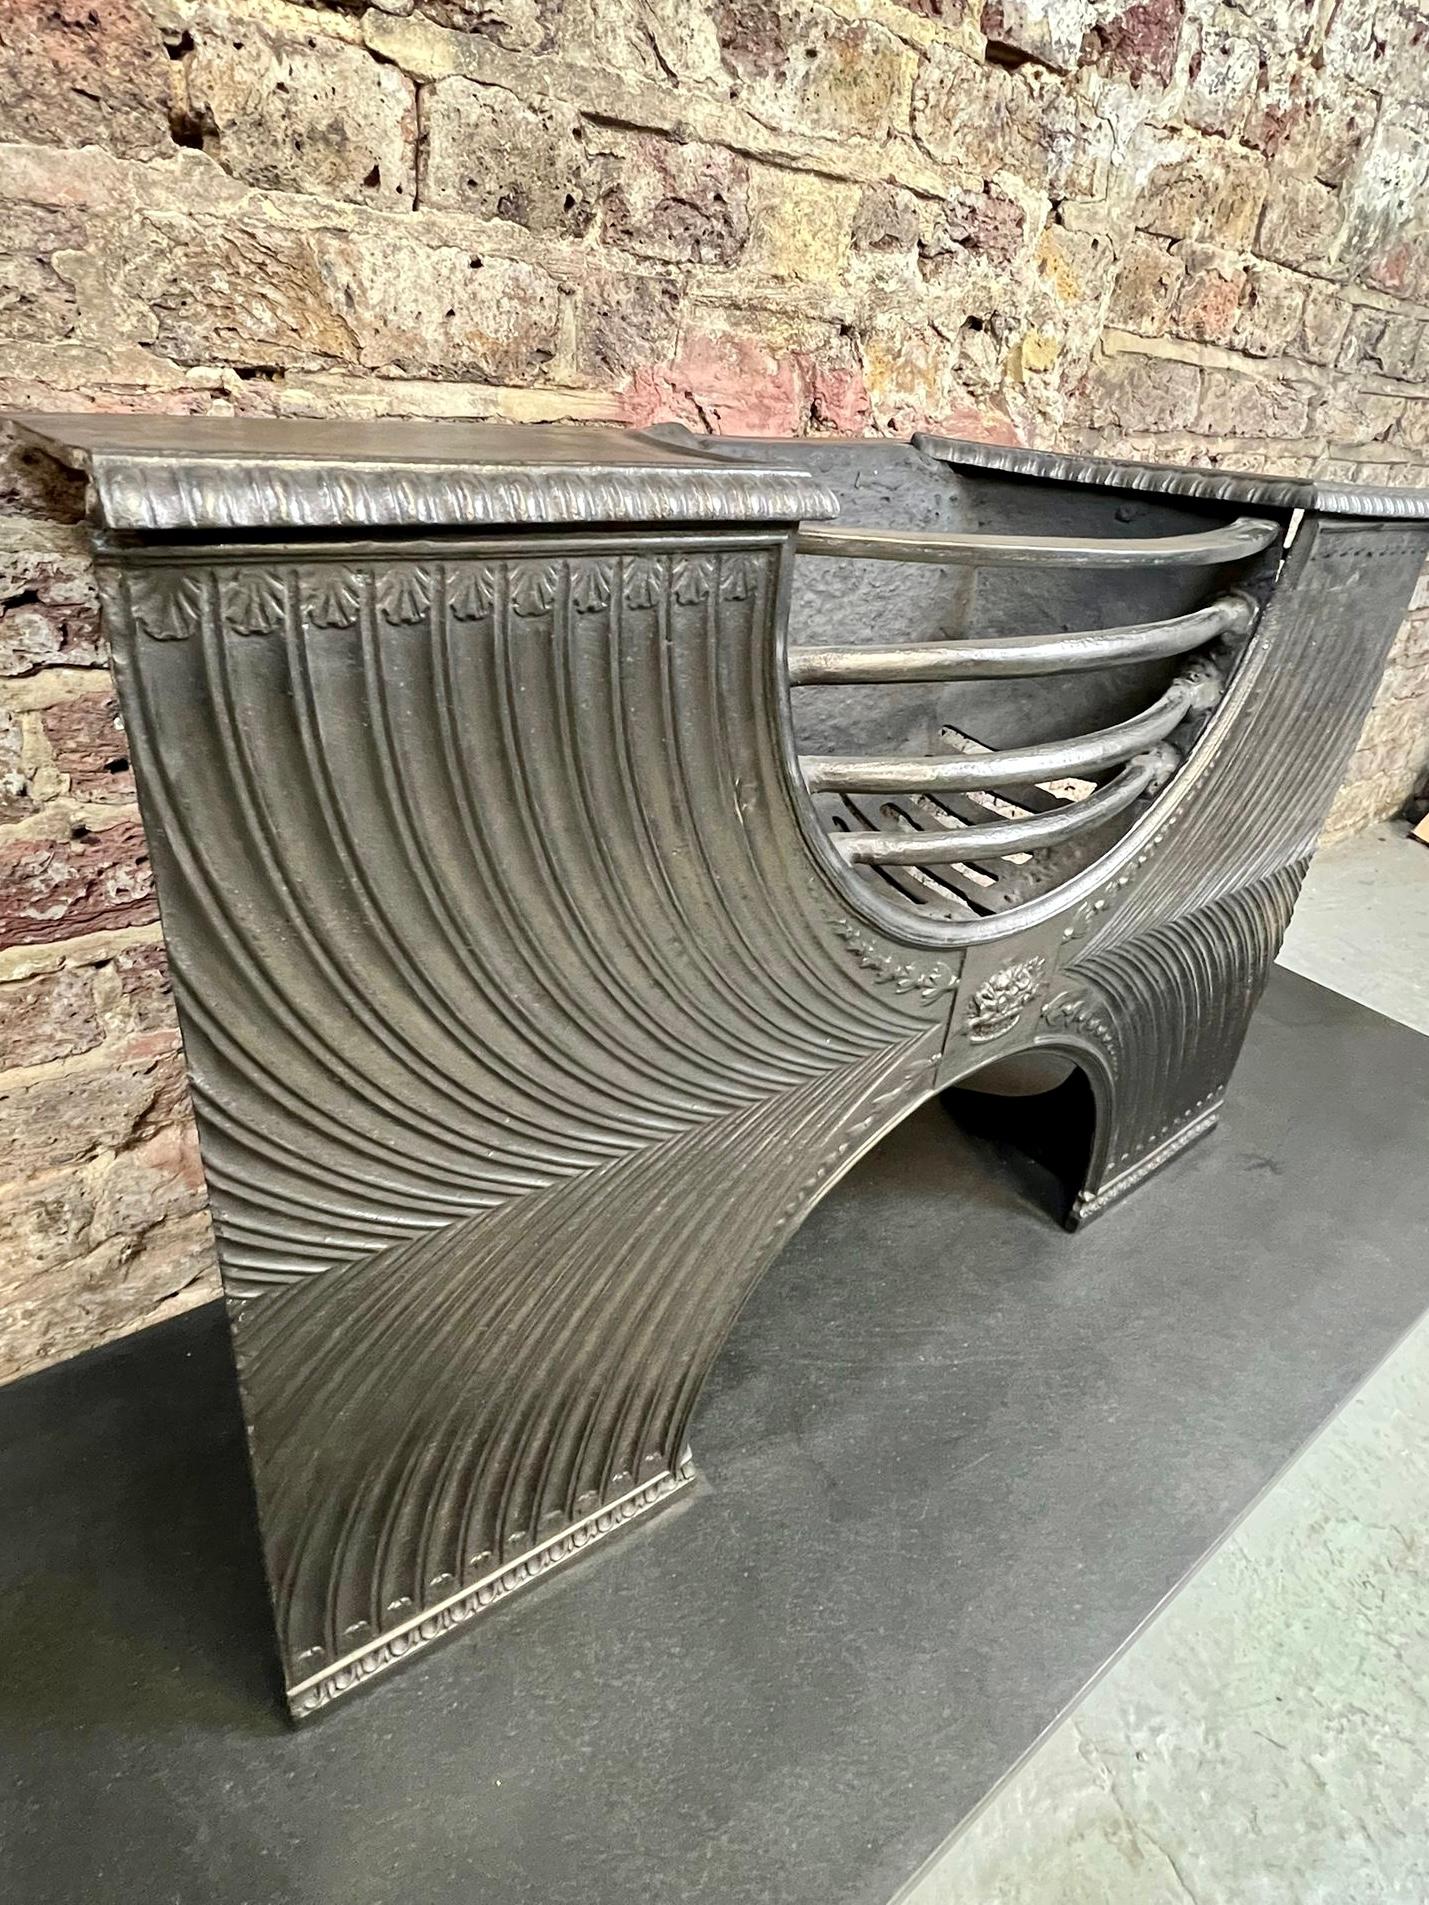 19th Century Georgian Cast Iron Hob Grate Fireplace.
Antique Original Hourglass Georgian Hob Grate, In The Manner Of Robert Adam.
With Simple Reed And Bead Design To Curved Panels Sweeping The Grate.
Recently Salvaged From A London Town House